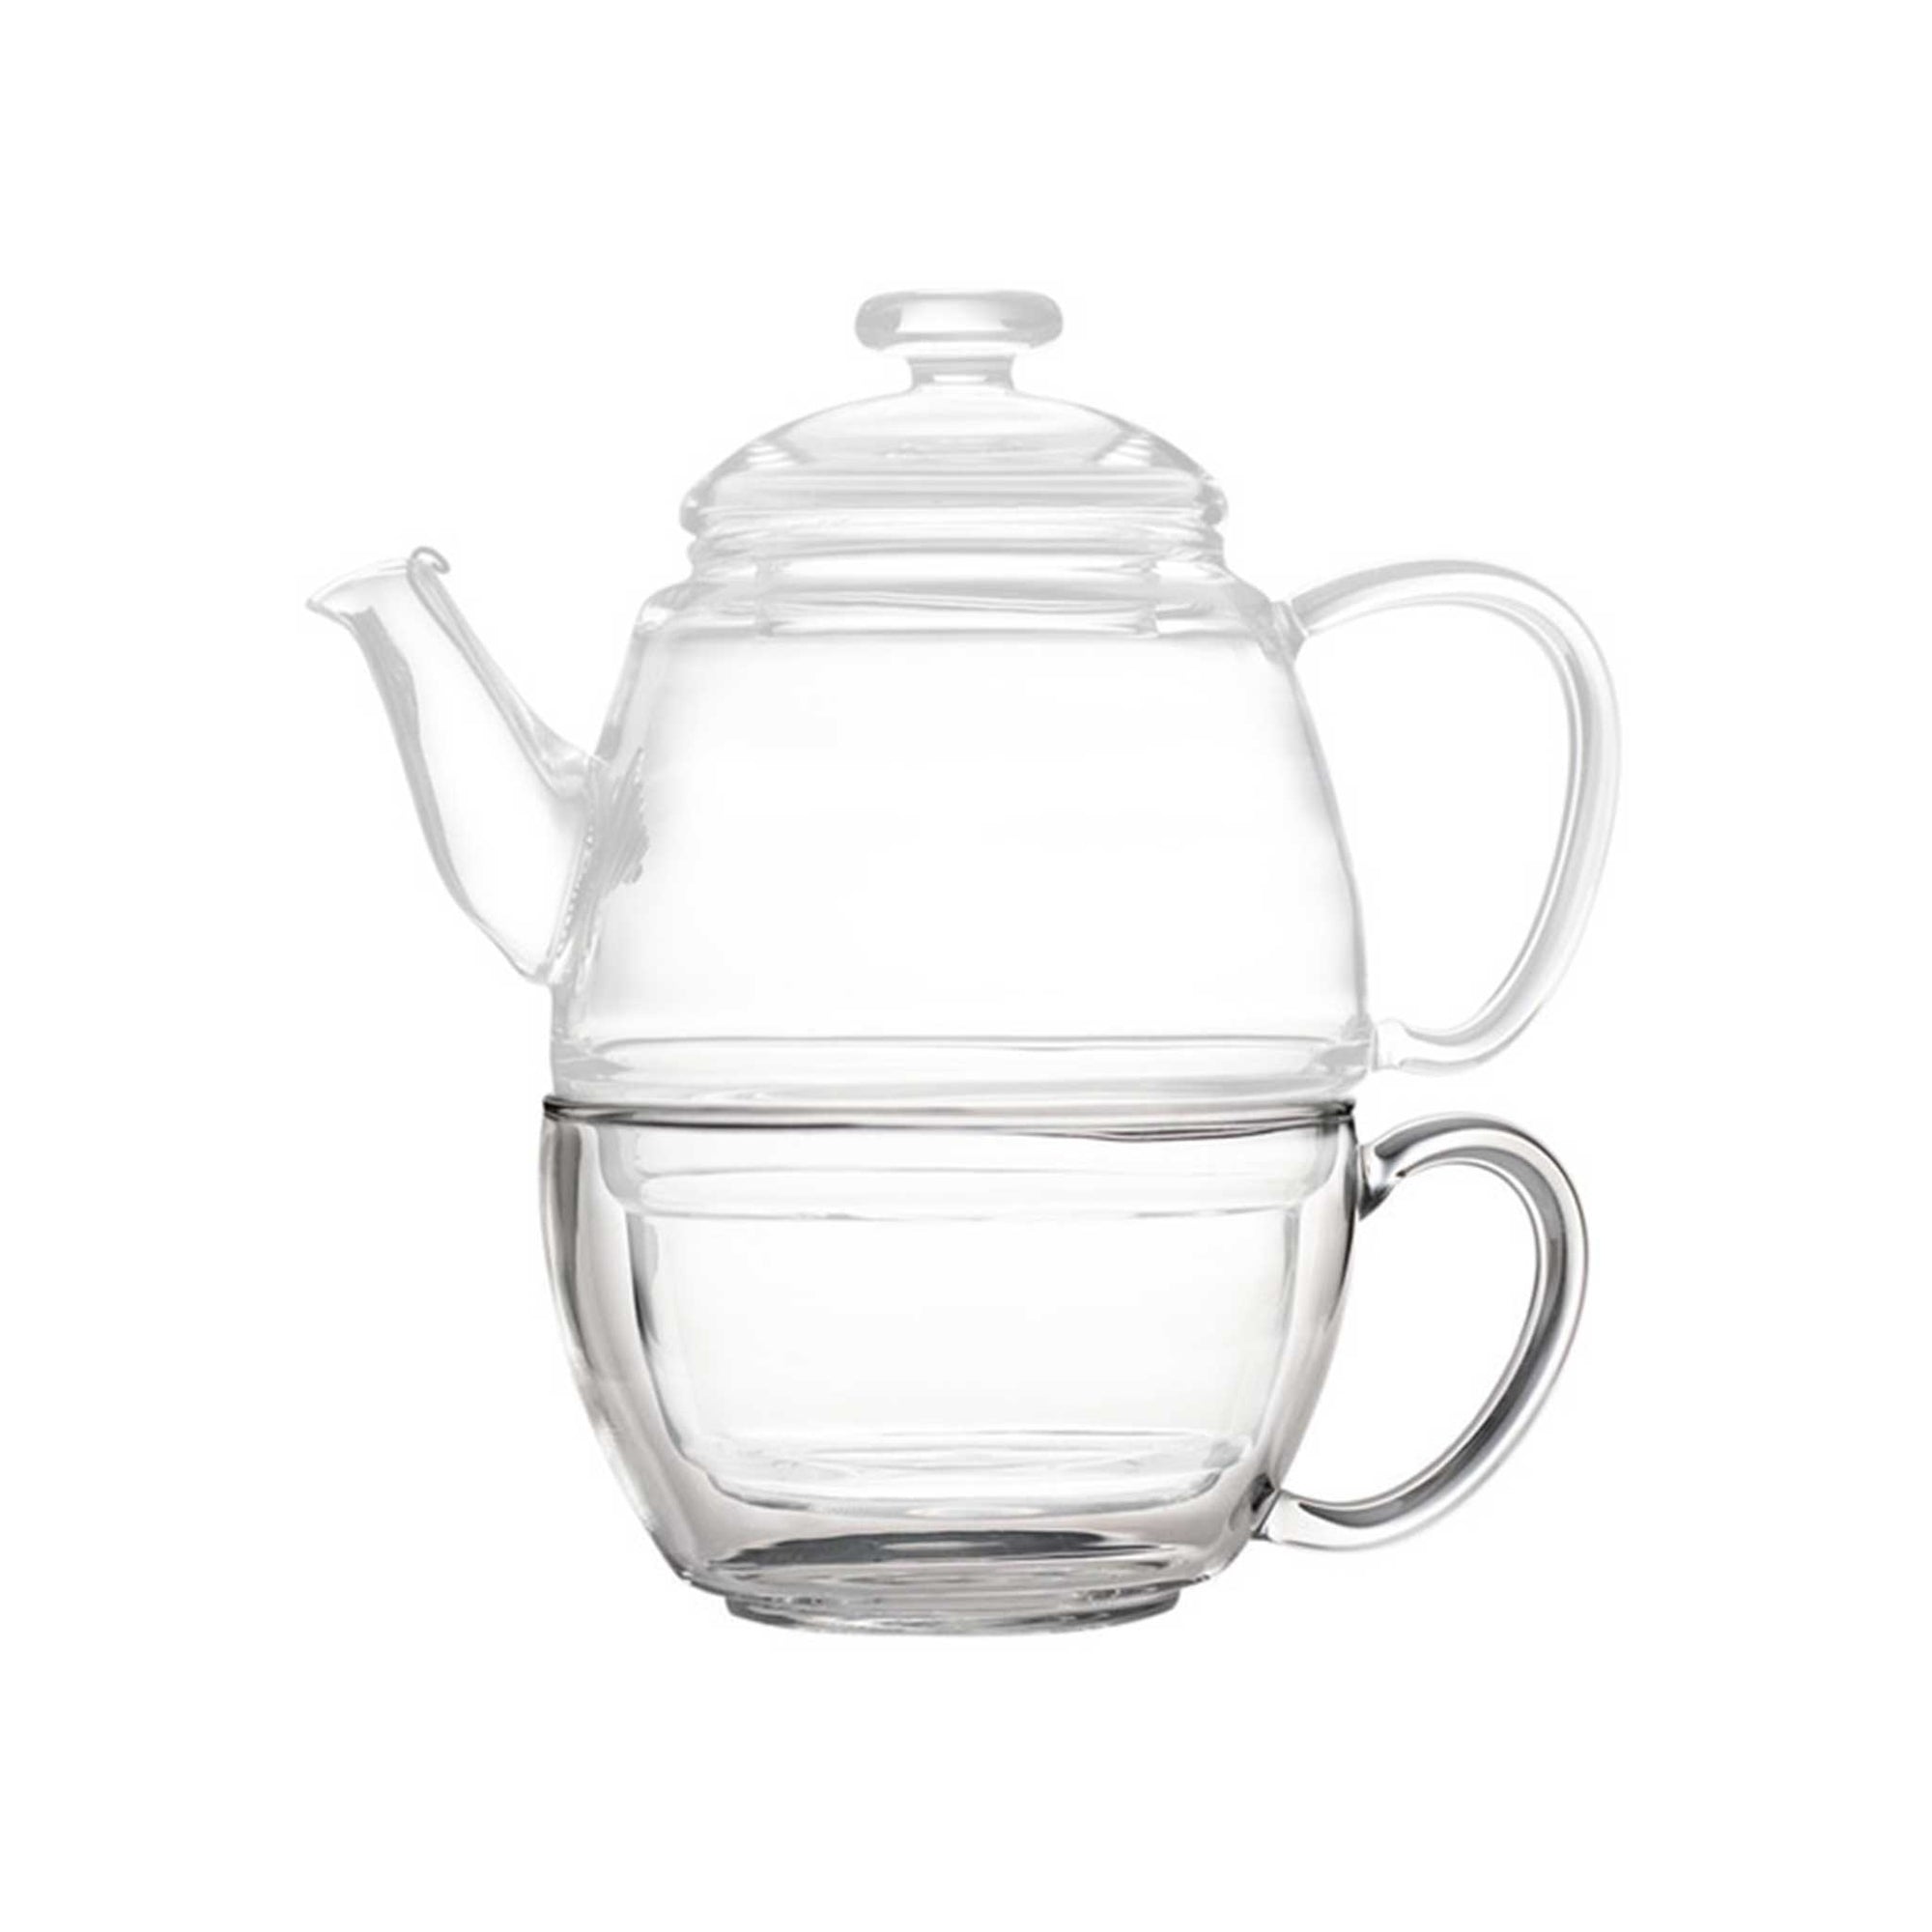 Glass tea cup replacment for the Teaposy charme posy gift set